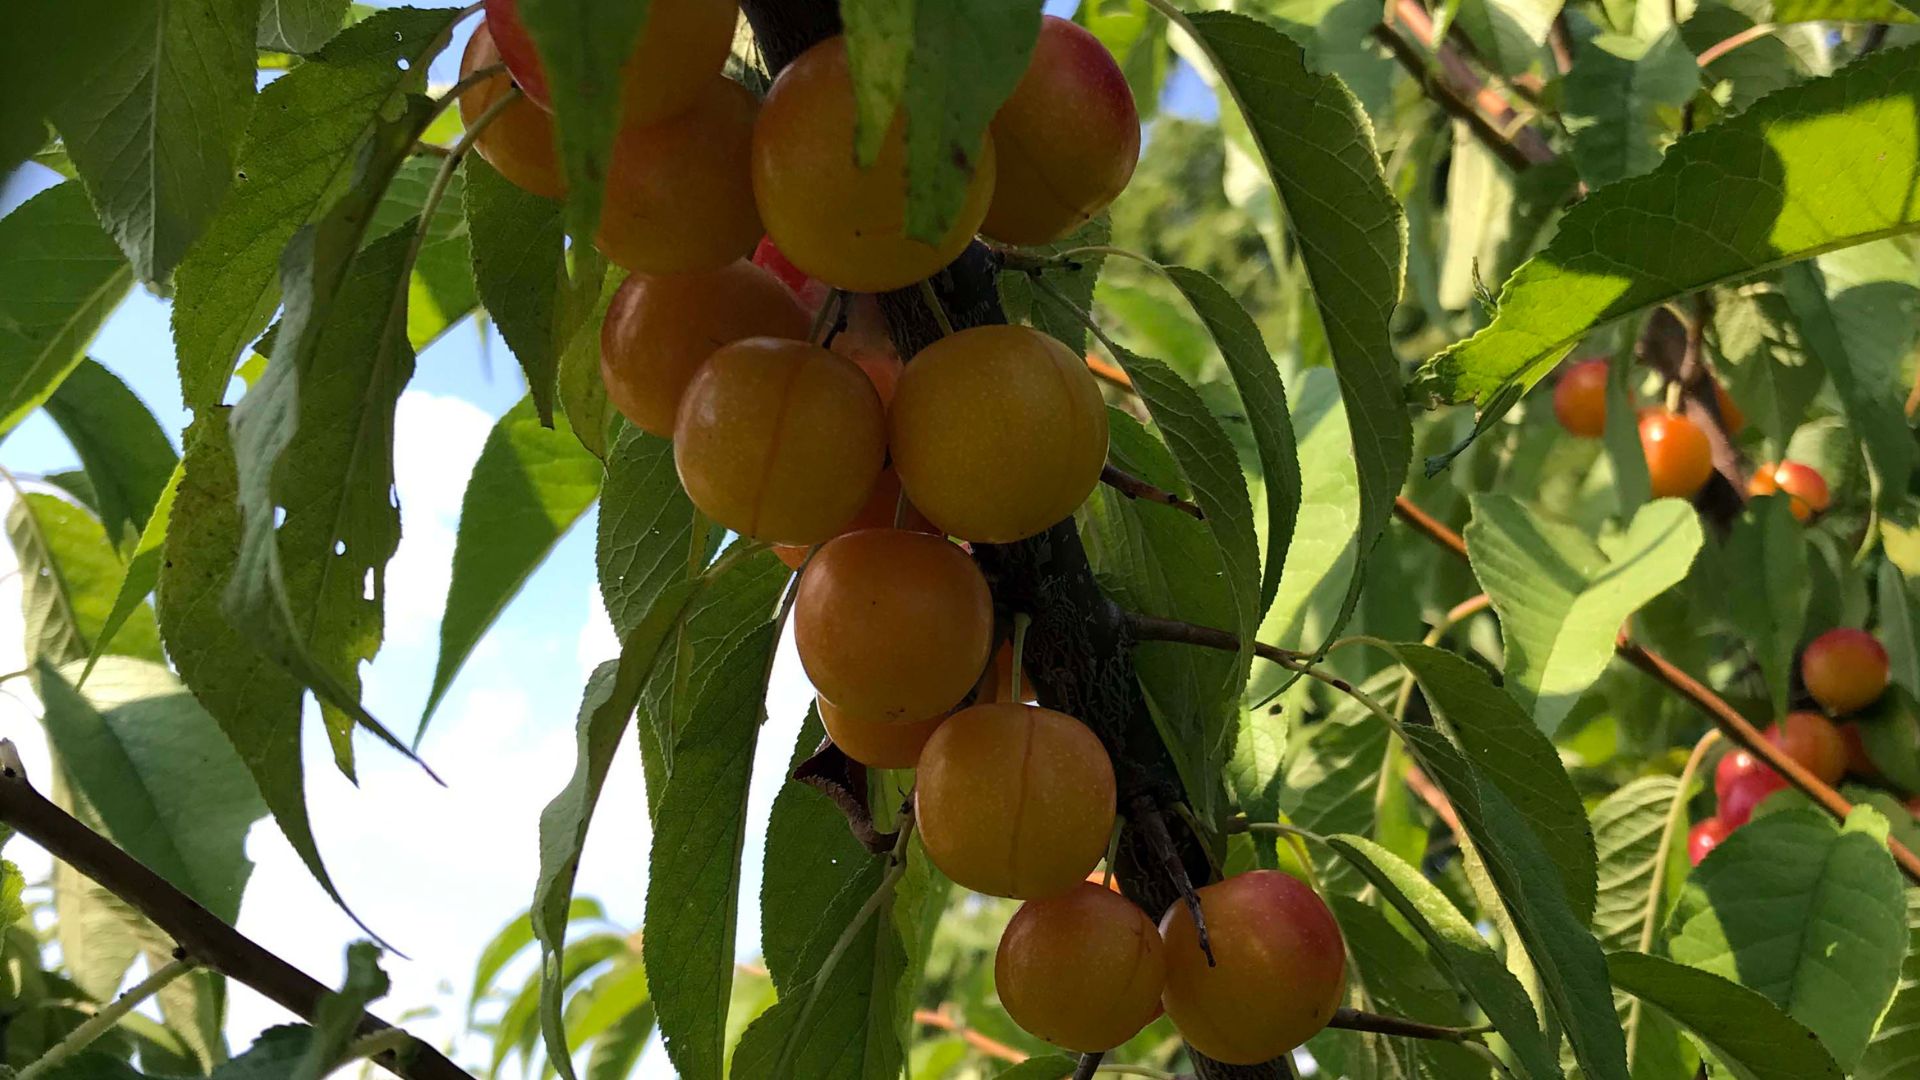 Orange fruits hanging from a tree with green leaves.